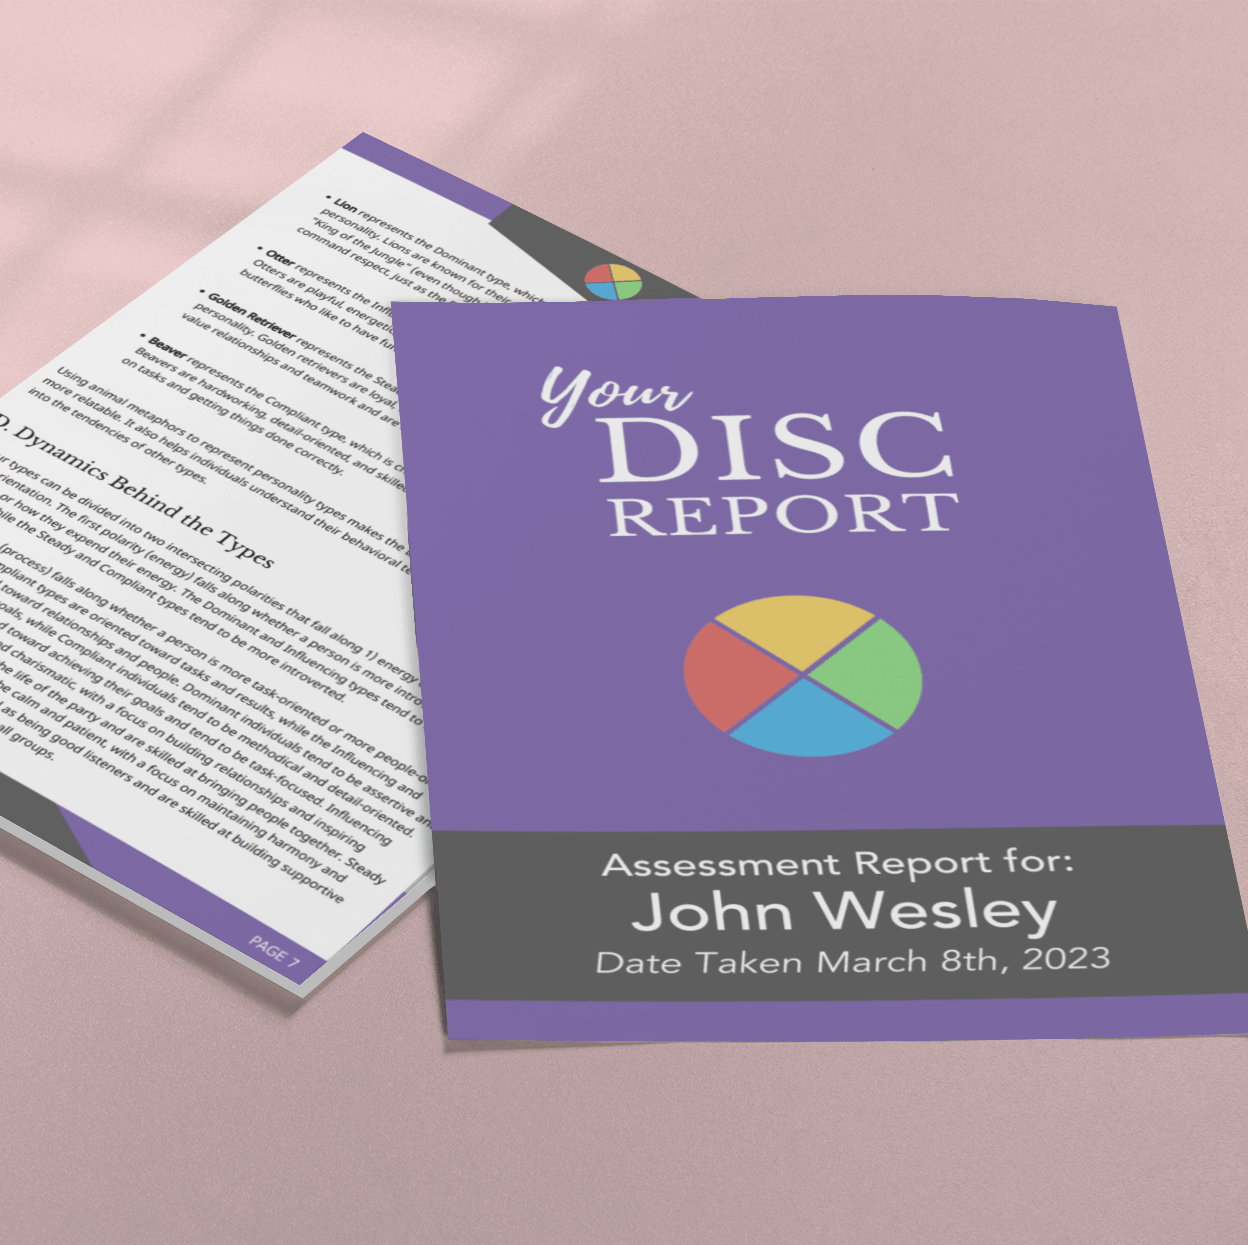 What is DiSC?, Personality assessments